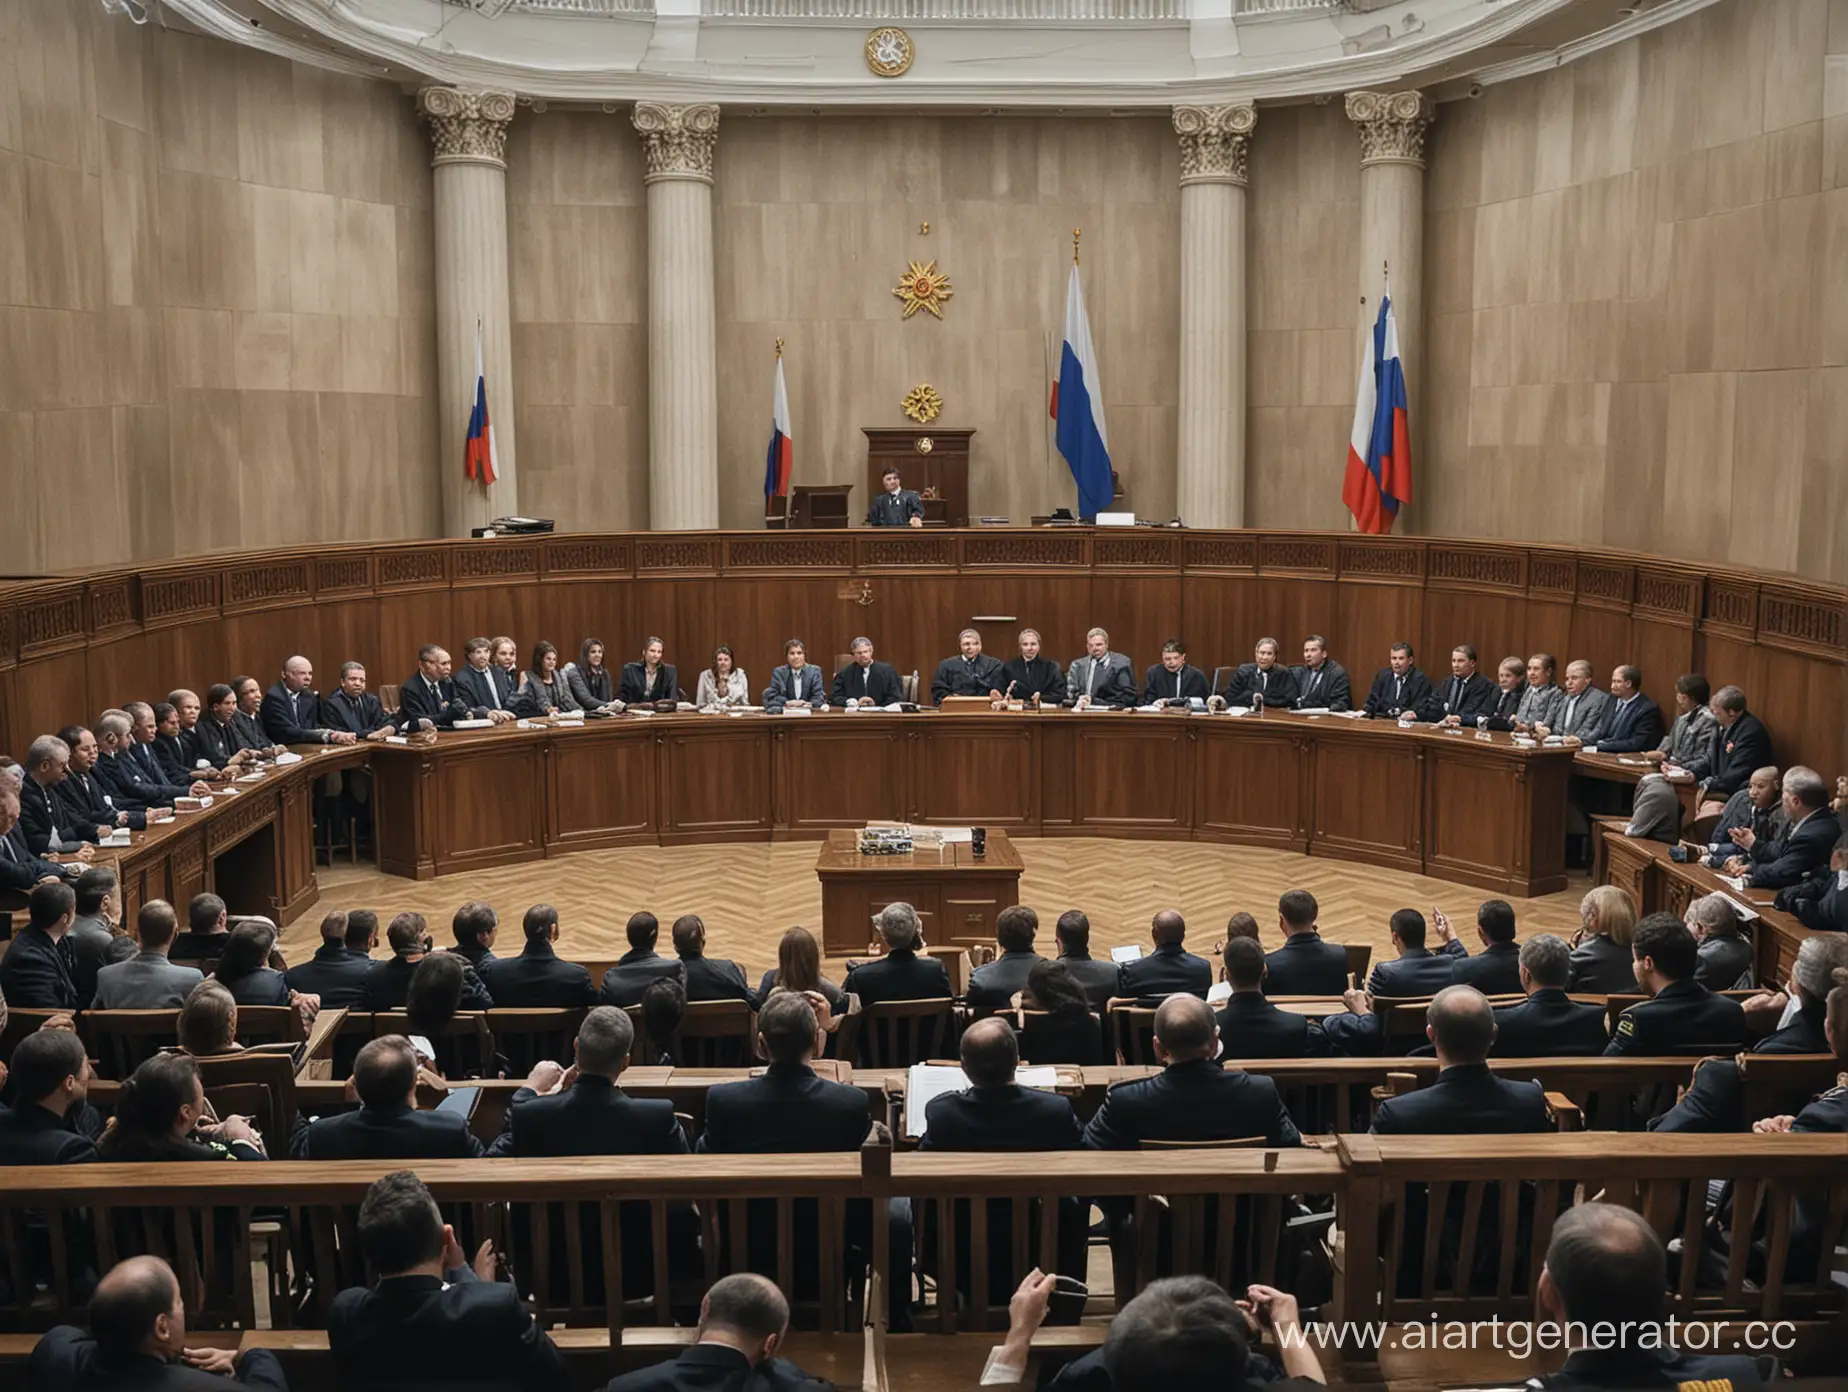 Russian-Court-Session-Legal-Proceedings-in-a-Courtroom